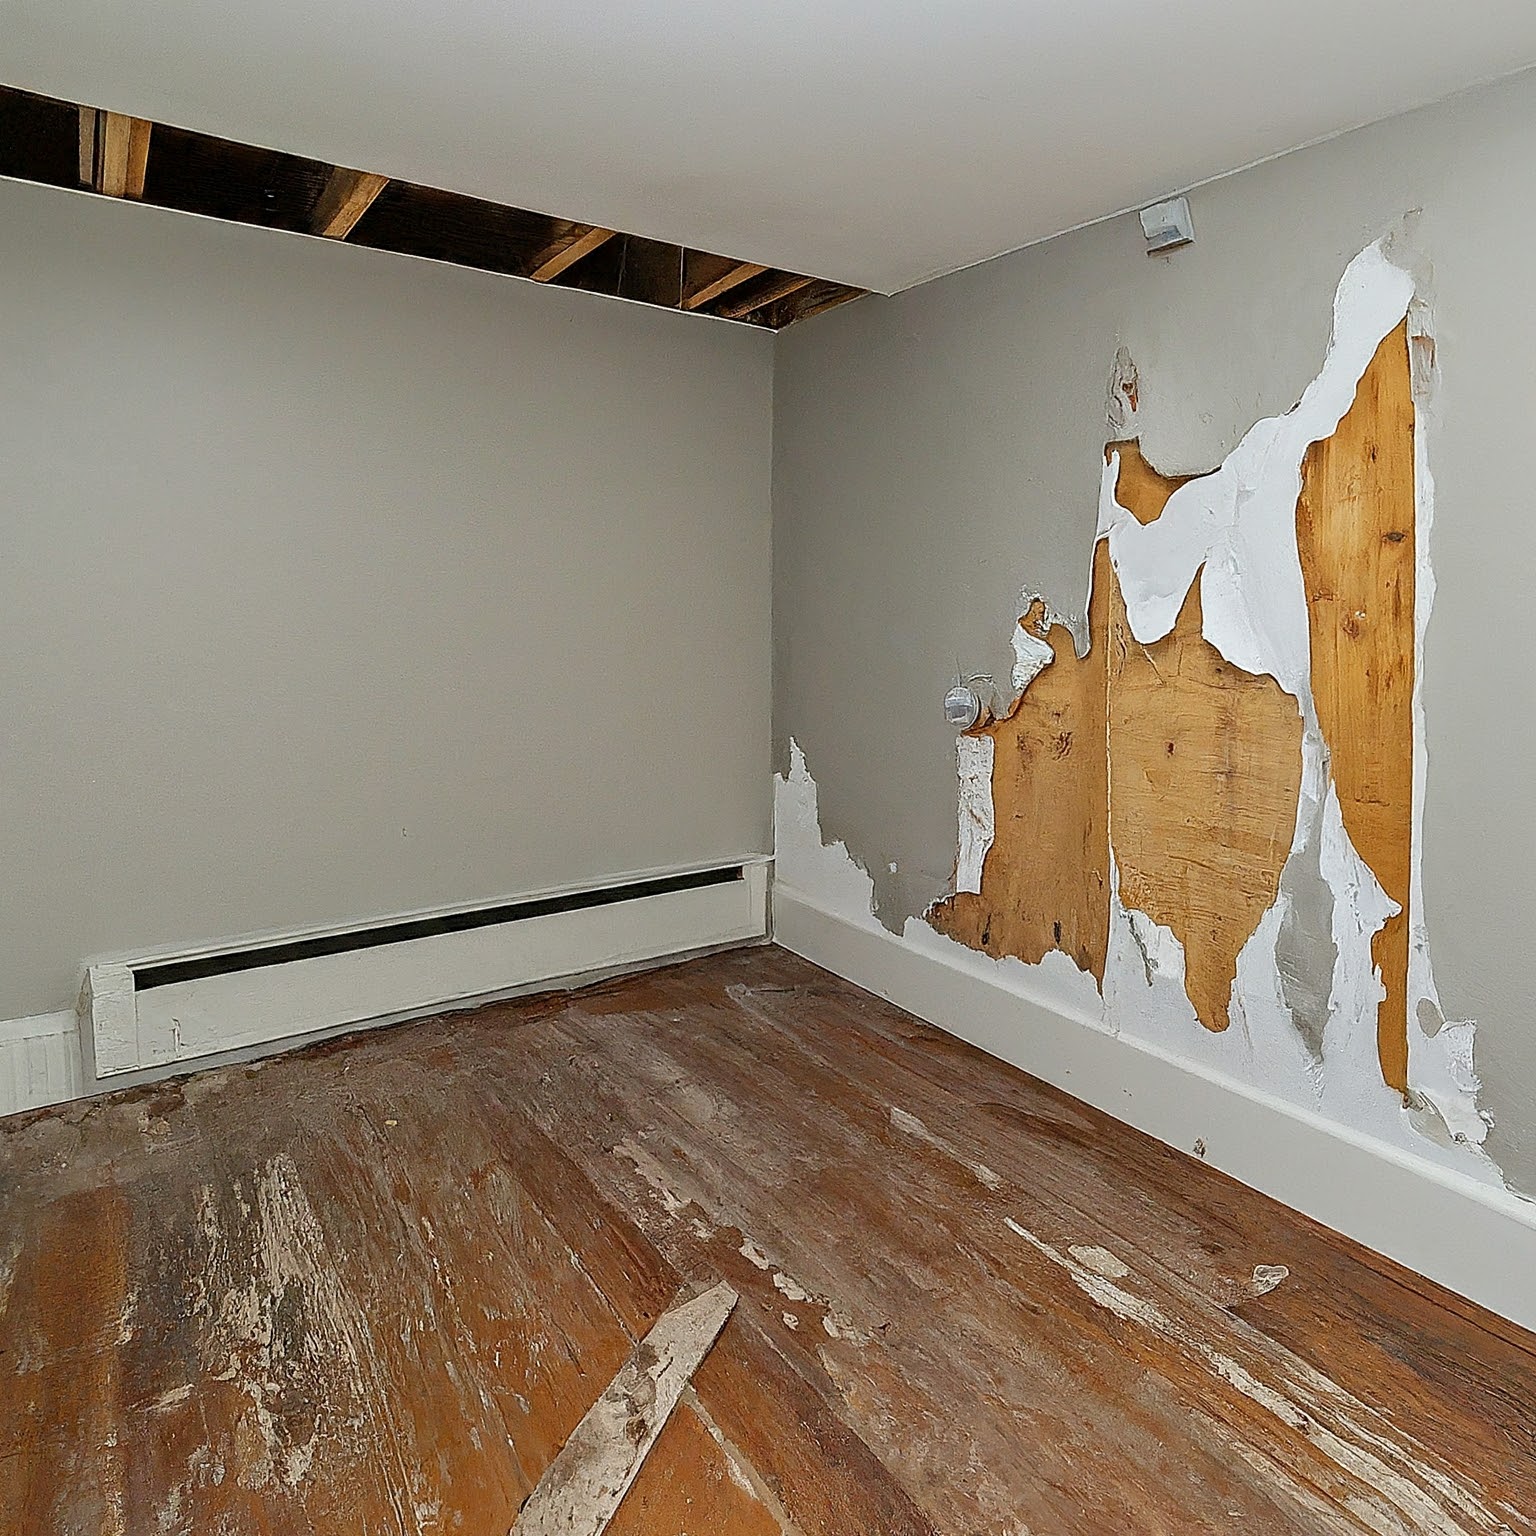 A room with exposed ceiling beams, damaged walls with peeling paint and plaster, and a worn wooden floor reveals significant signs of disrepair, hinting at the need for mold restoration. -PureOneServices